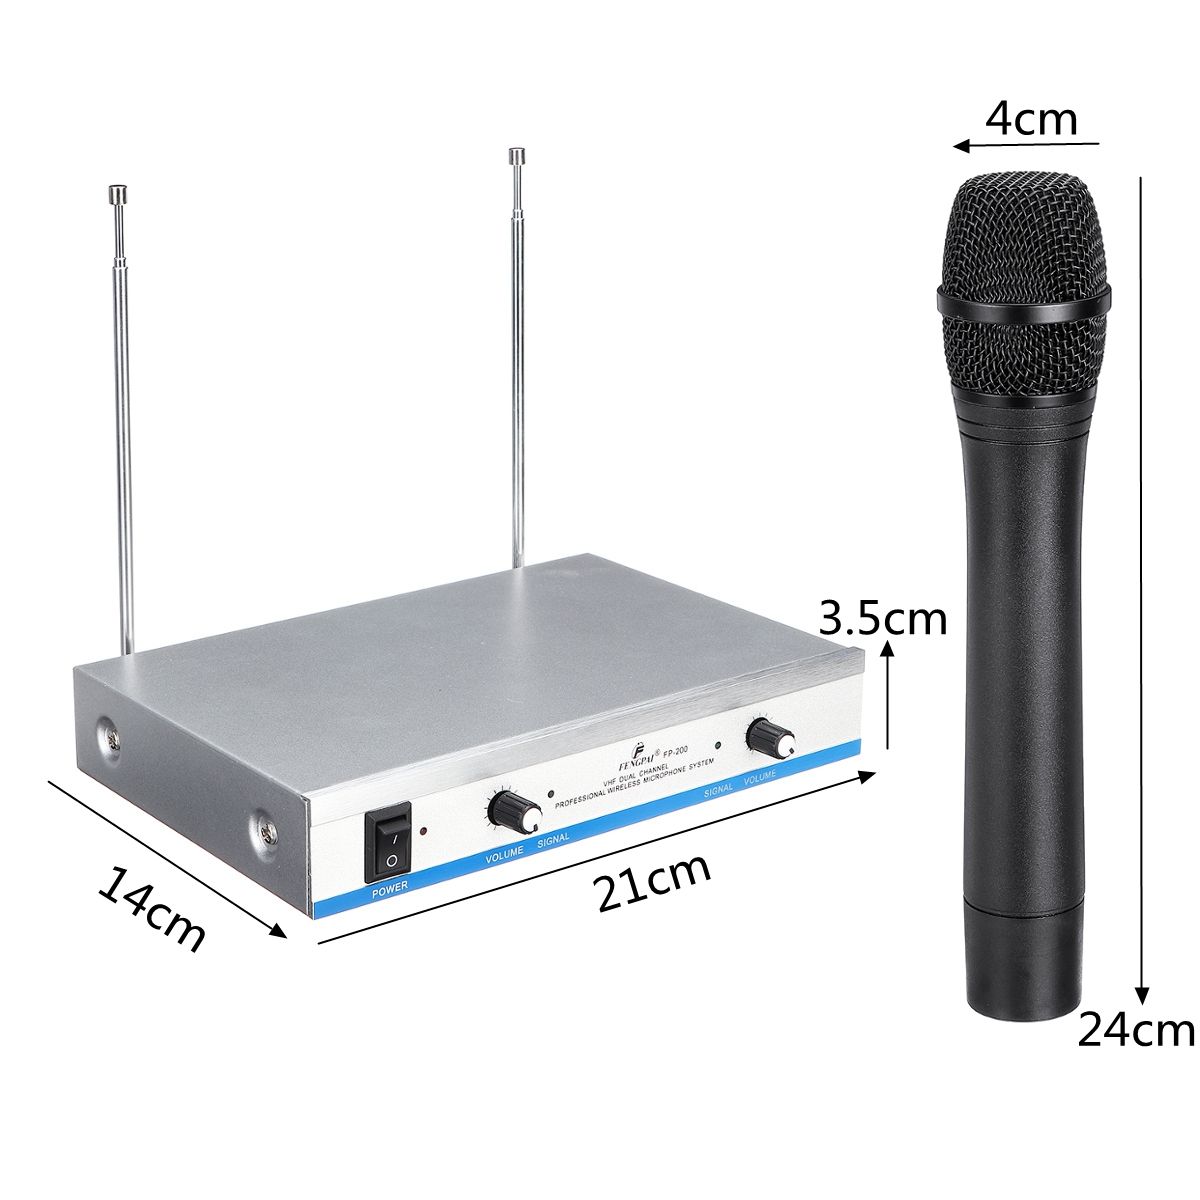 Professional-2-Channel-2-Cordless-Handheld-Mic-UHF-Wireless-Microphone-System-1530036